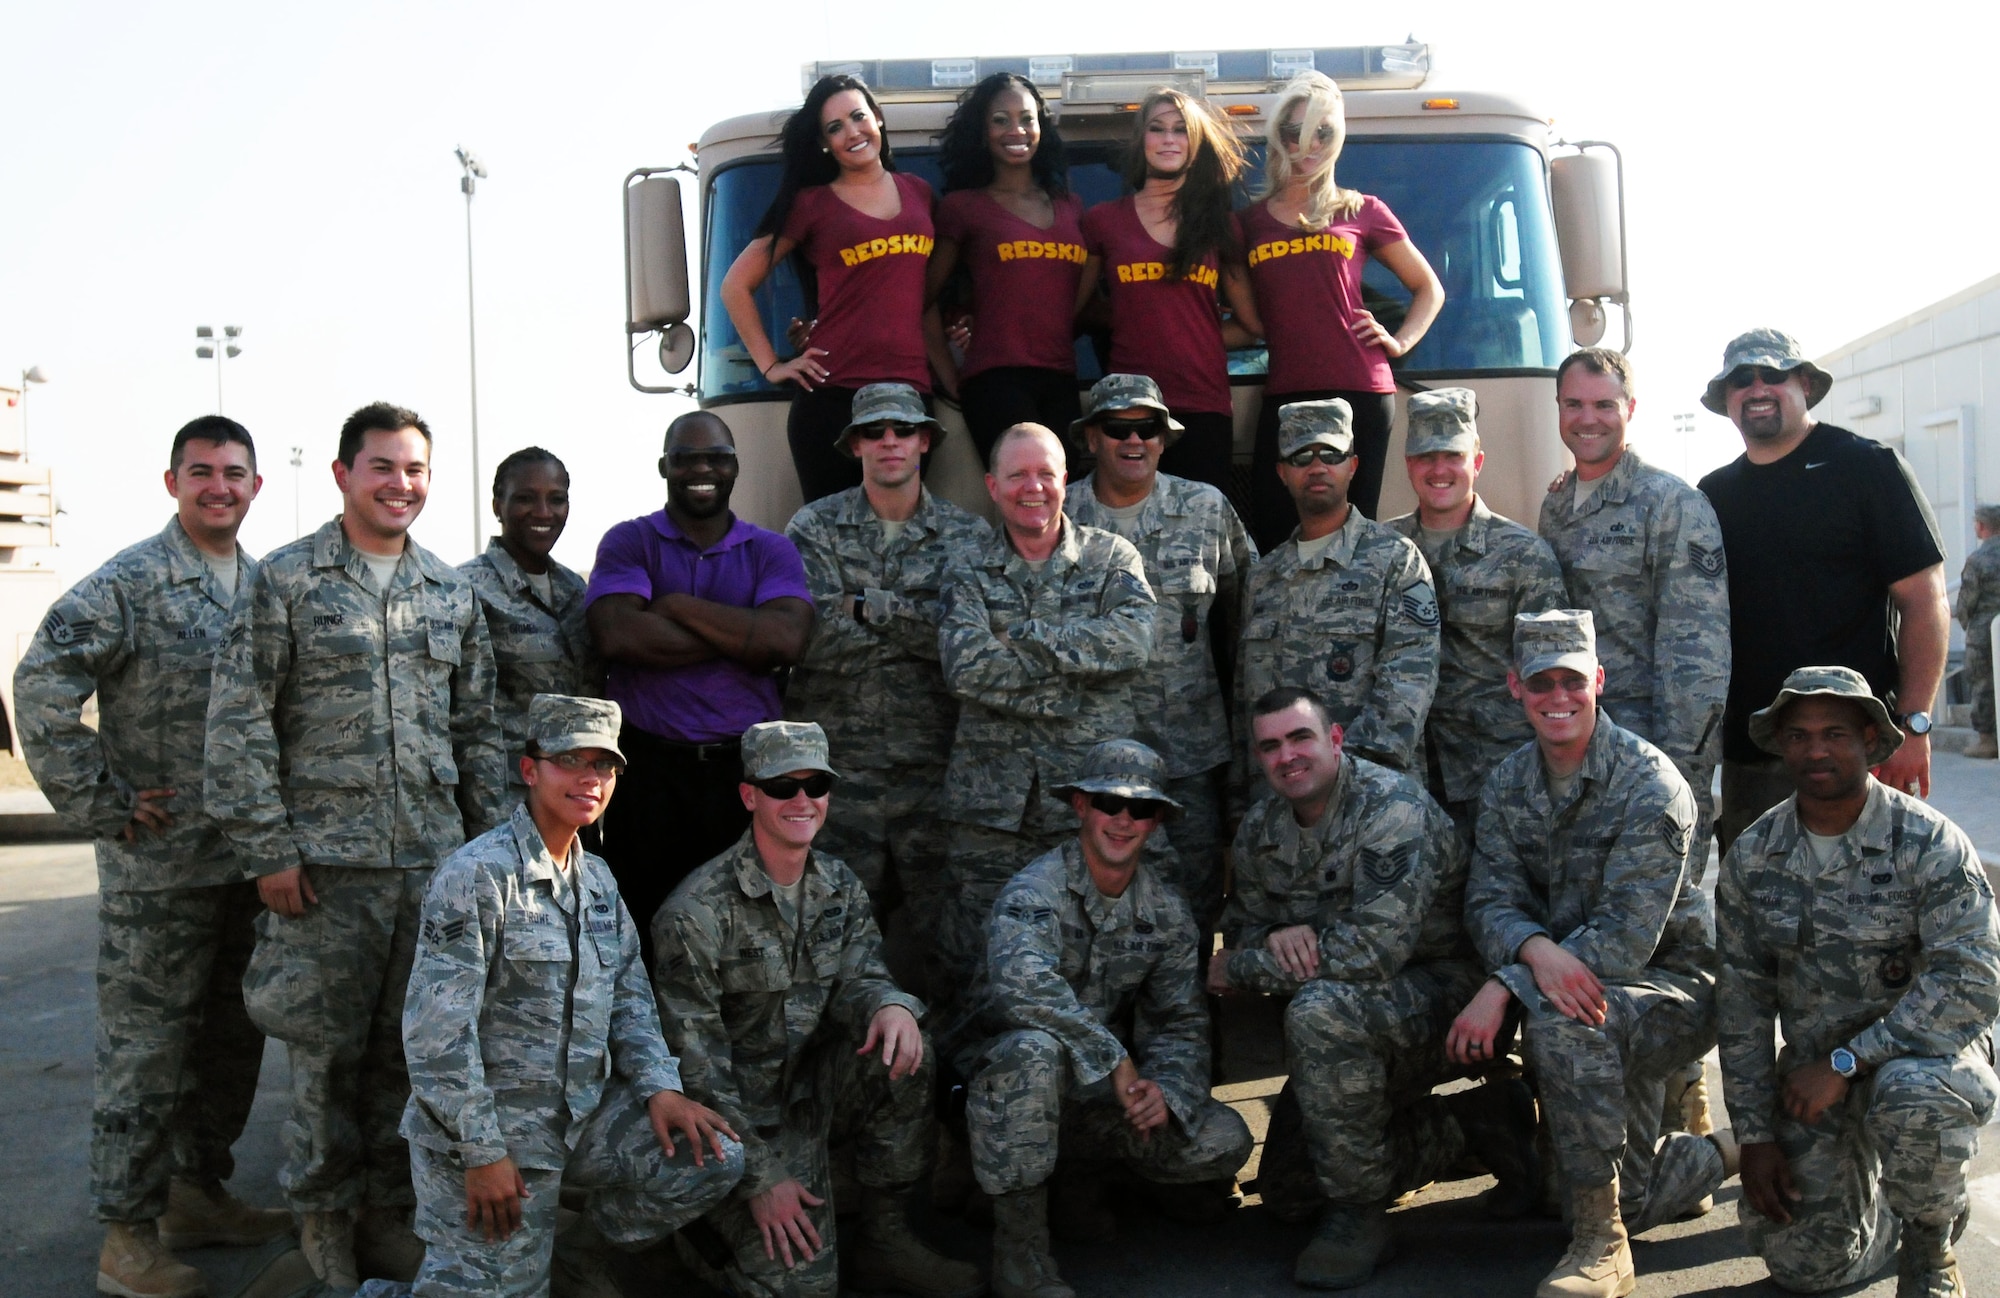 NFL players Marco Rivera and R.W. McQuarters, four members of the Washington Redskins Cheerleaders and Top Cover, the U.S. Air Forces Central Command band, pose with firefighters at the 380th Air Expeditionary Wing Oct. 20, 2011. The football players and cheerleaders visited the base as part of an Armed Forces Entertainment tour for deployed service members. Top Cover visited the base during their tour to bases in the area of responsibility. (U.S. Air Force photo/Capt. Gina Vaccaro McKeen)